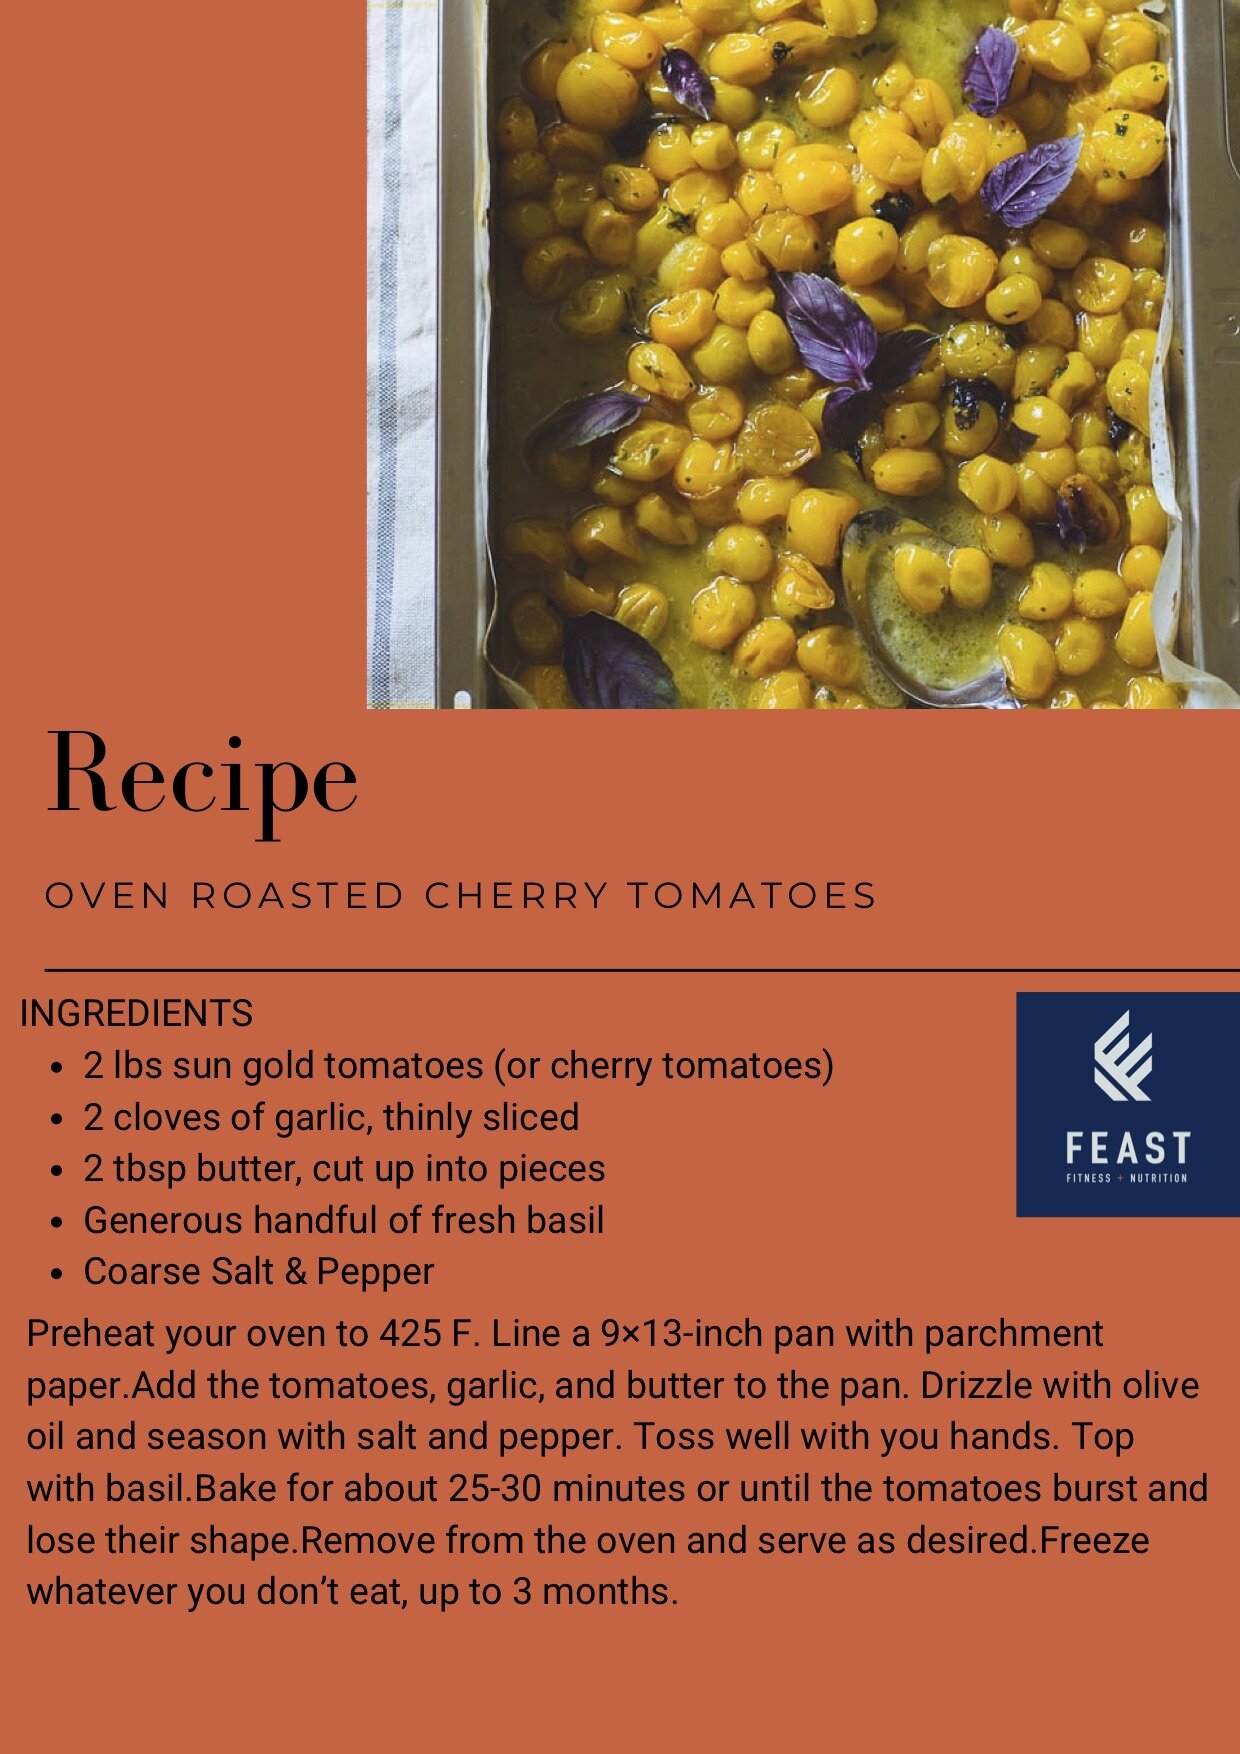 Feast Produce of the Month Sweet Gold Cherry Tomatoes Recipe.jpg